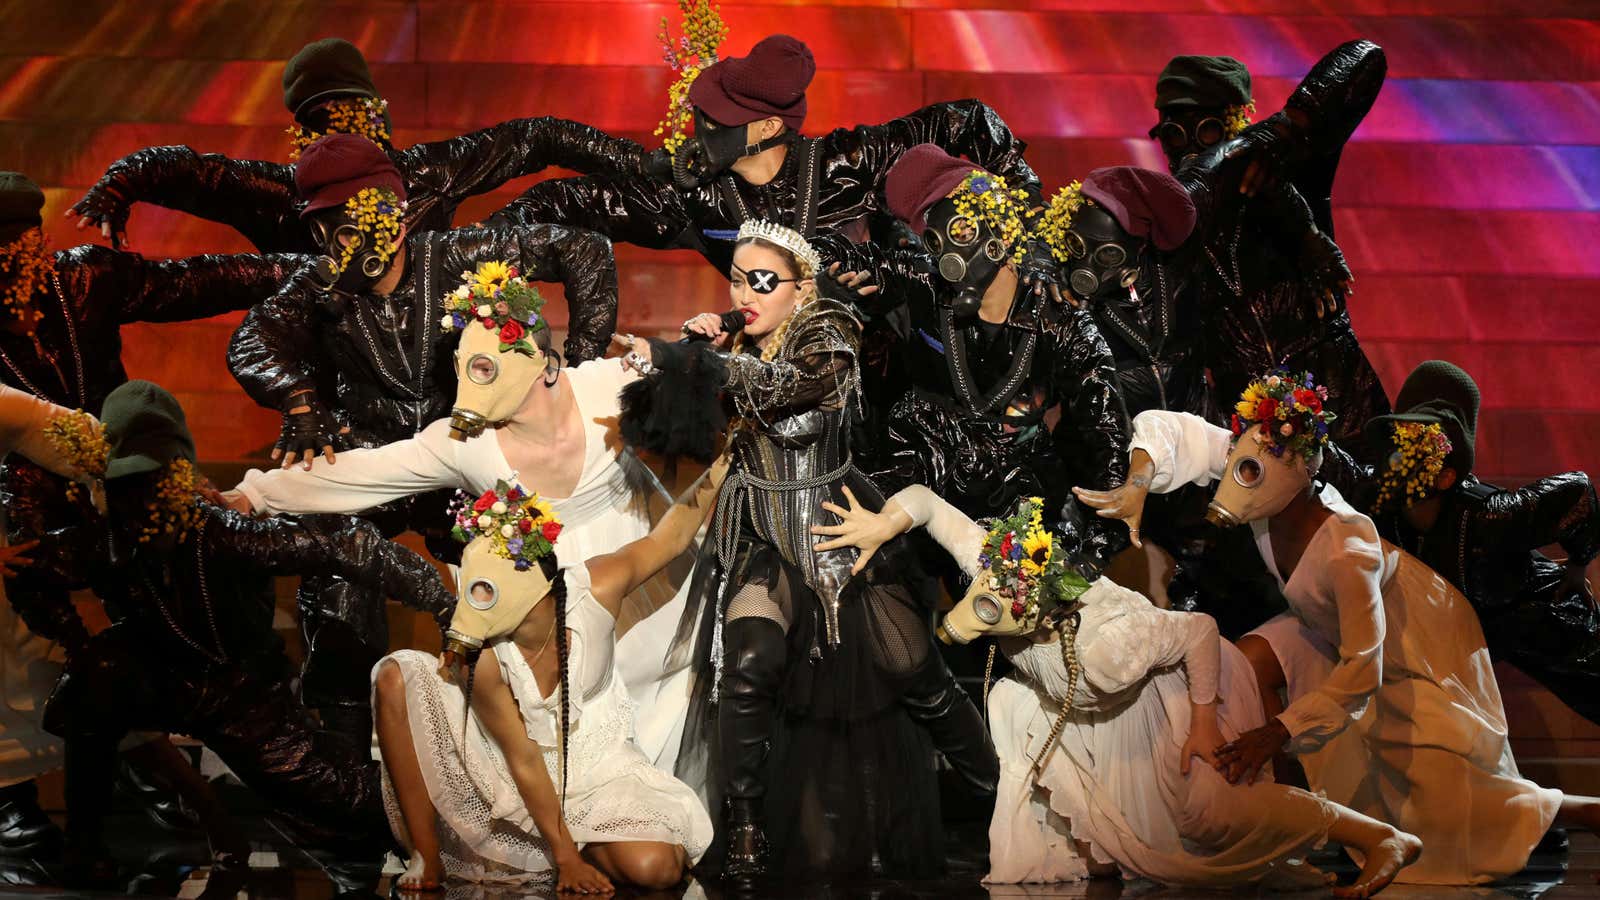 Madonna’s performance stole the show at Eurovision, but not in entirely in a good way.